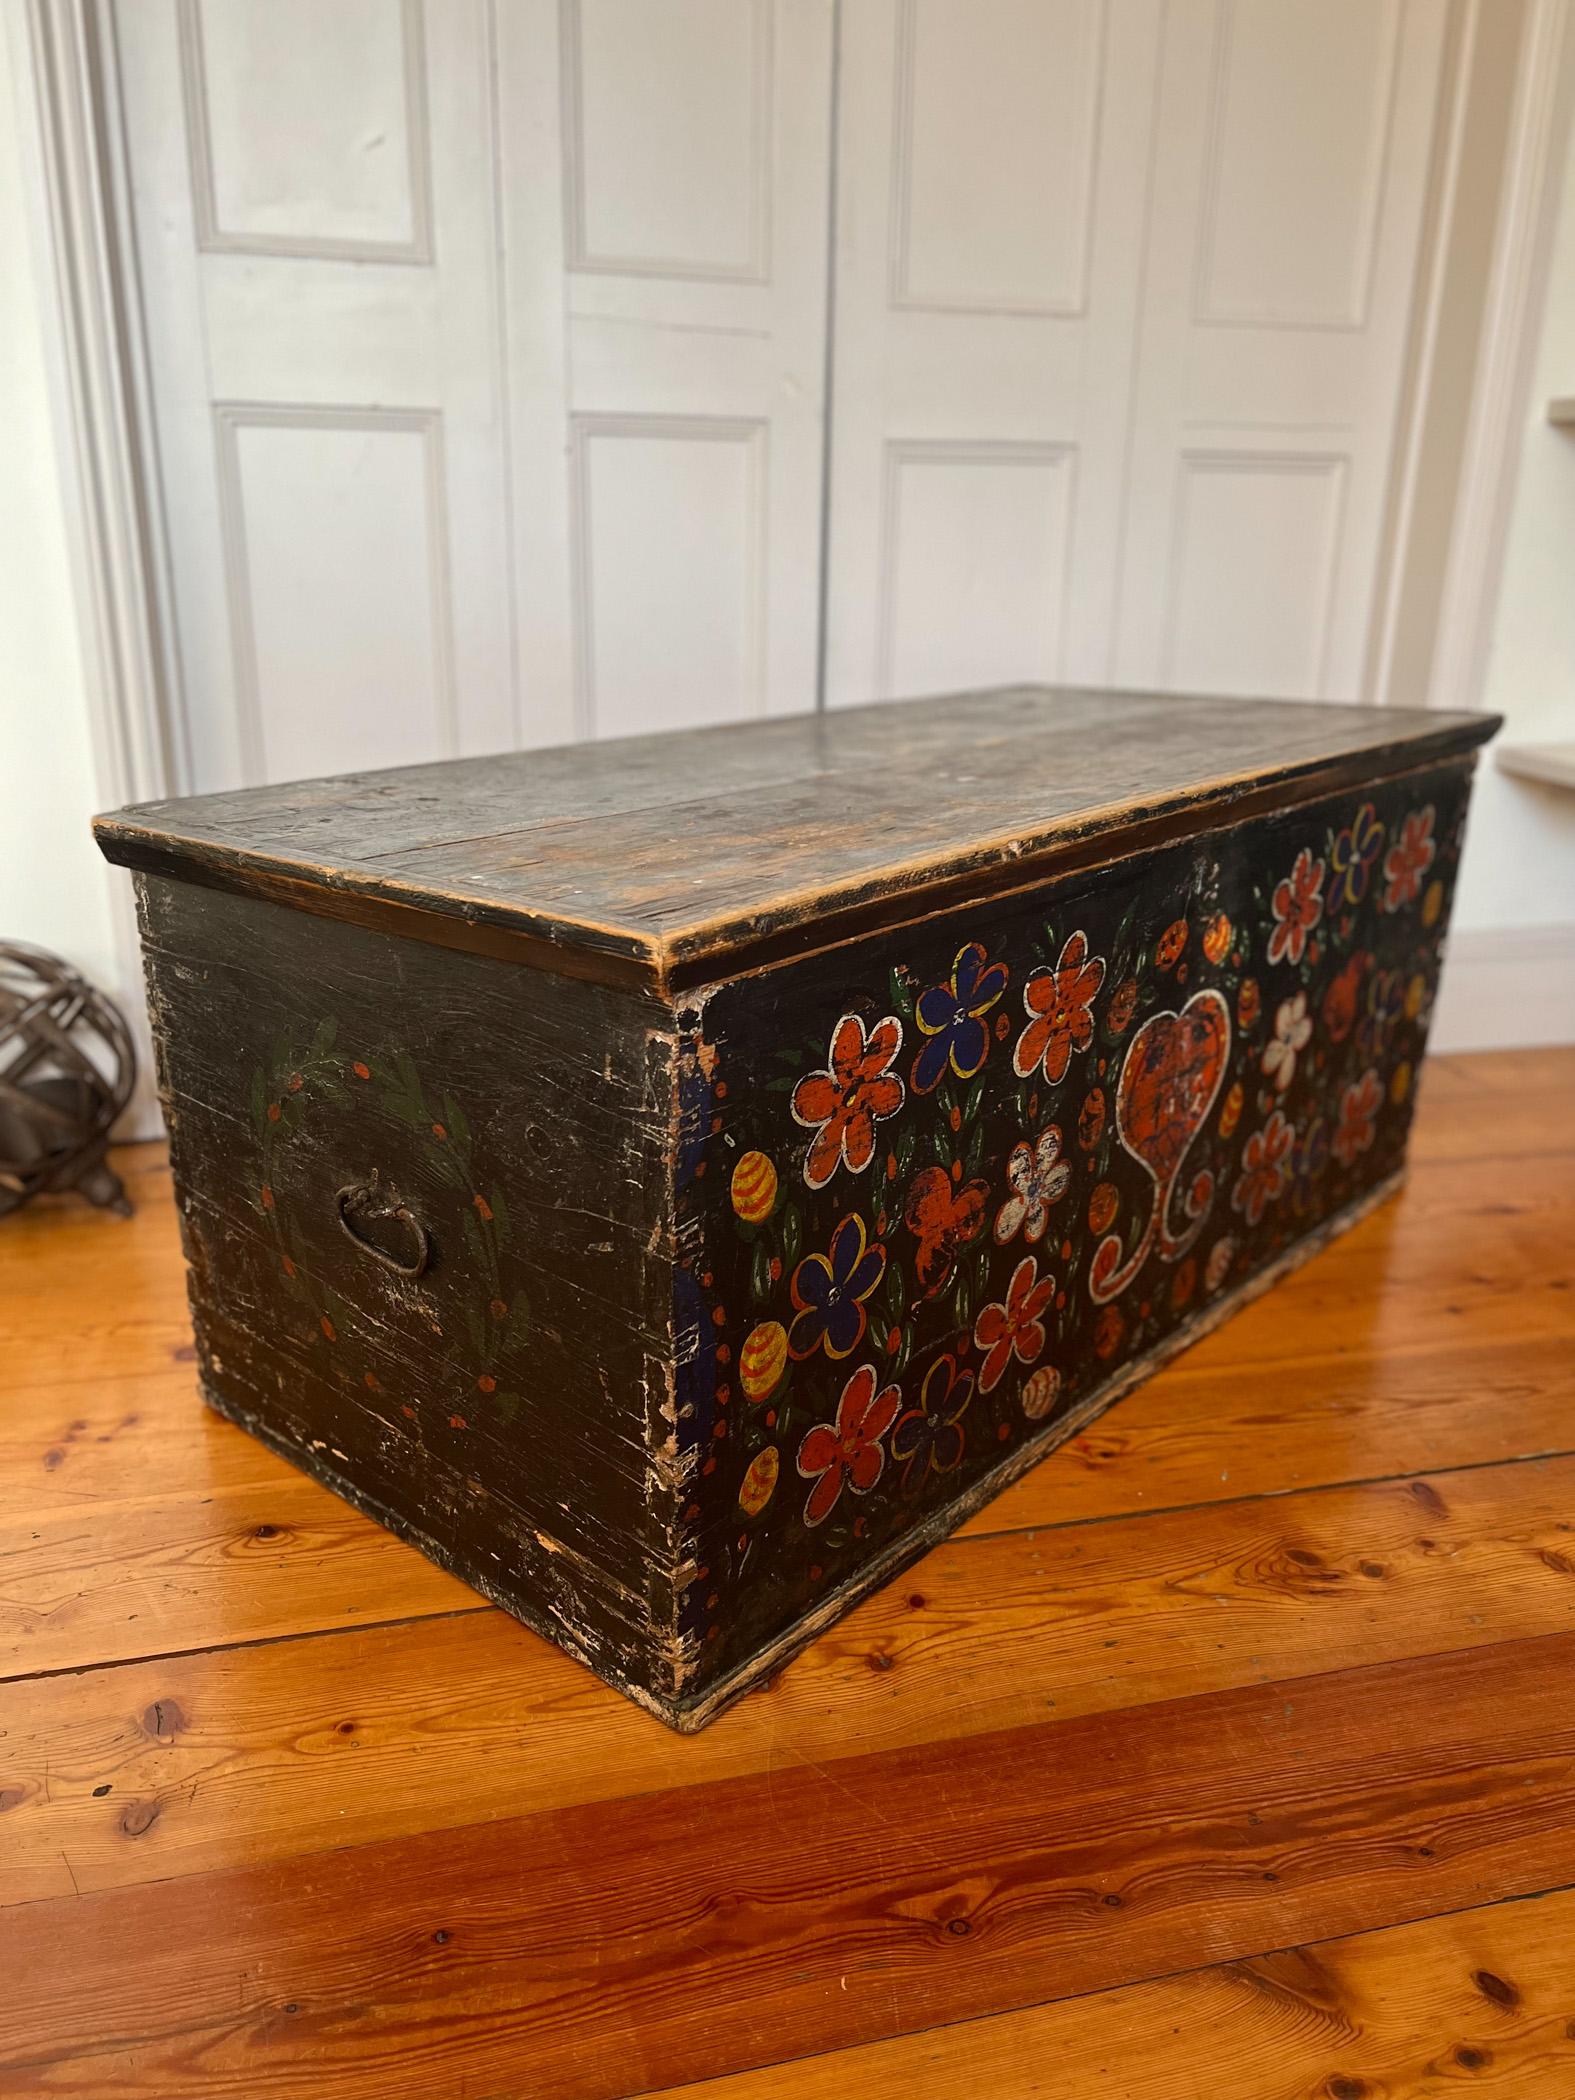 Hand-Painted Late 19 C Hand Painted Large Wooden Chest / Trunk from Brittany, France